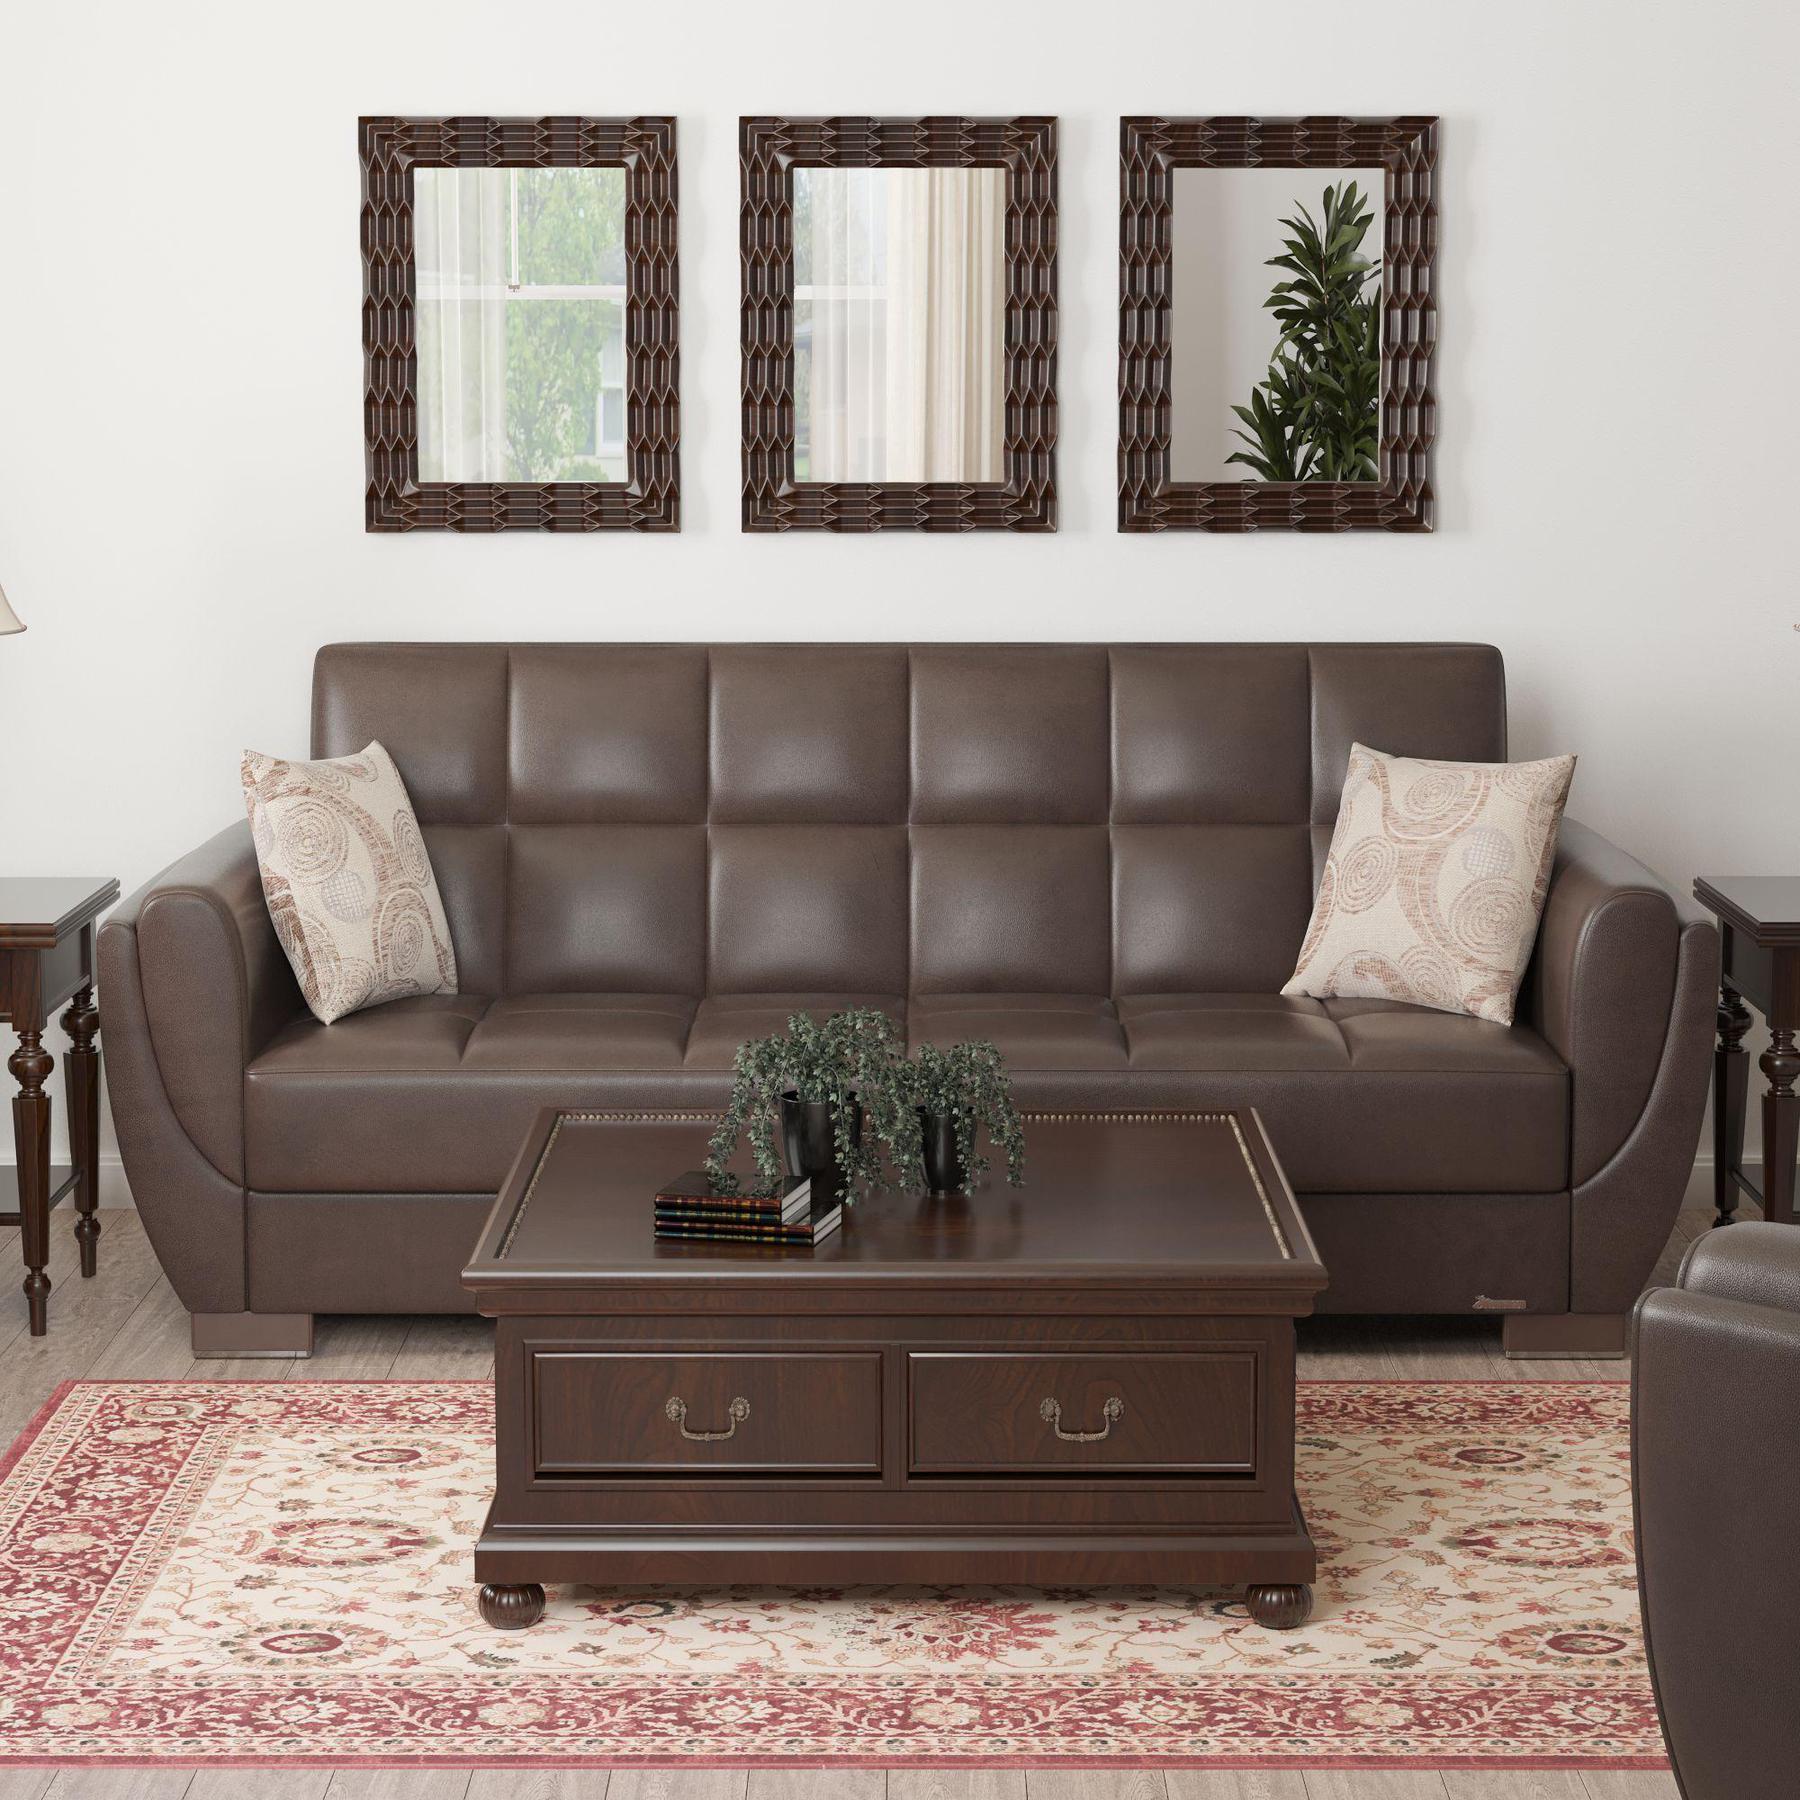 Modern design, Dark Brown , Artificial Leather upholstered convertible sleeper Sofabed with underseat storage from Voyage Shelter by Ottomanson in living room lifestyle setting by itself. This Sofabed measures 94 inches width by 36 inches depth by 41 inches height.